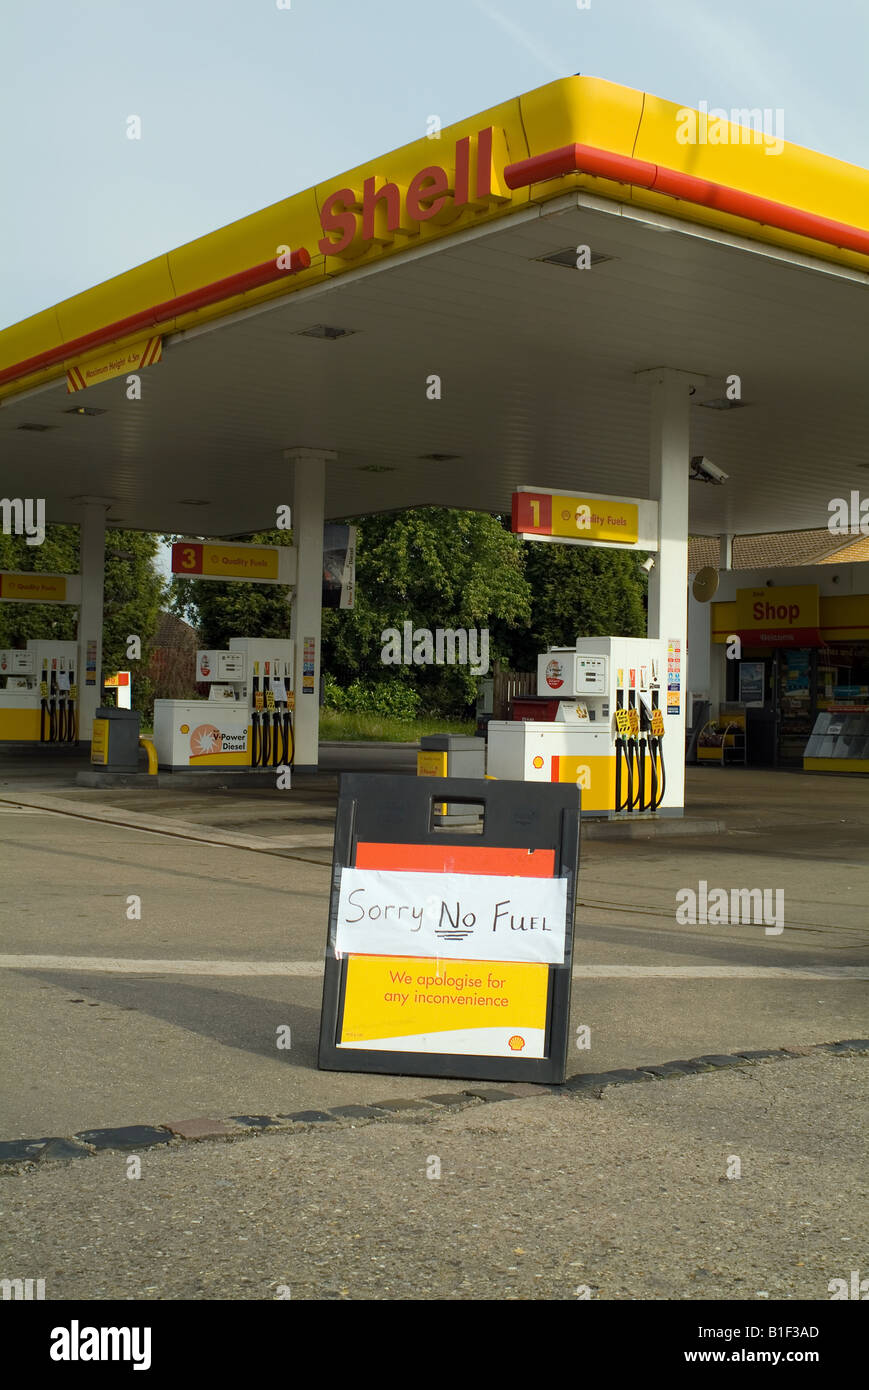 empty shell petrol filling station with no fuel Stock Photo